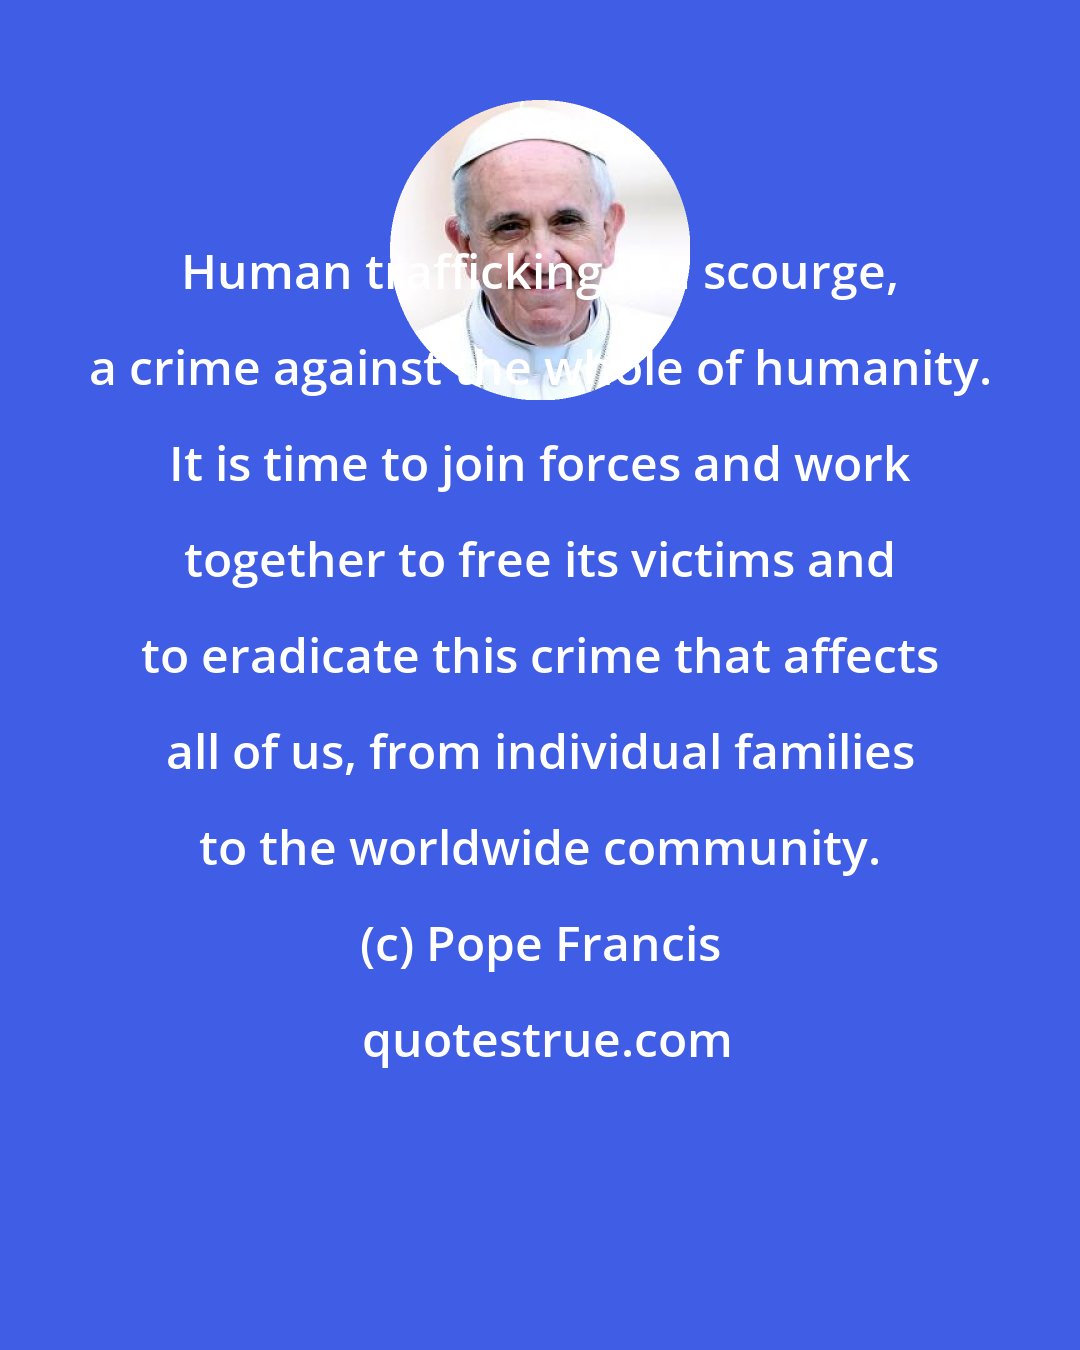 Pope Francis: Human trafficking is a scourge, a crime against the whole of humanity. It is time to join forces and work together to free its victims and to eradicate this crime that affects all of us, from individual families to the worldwide community.